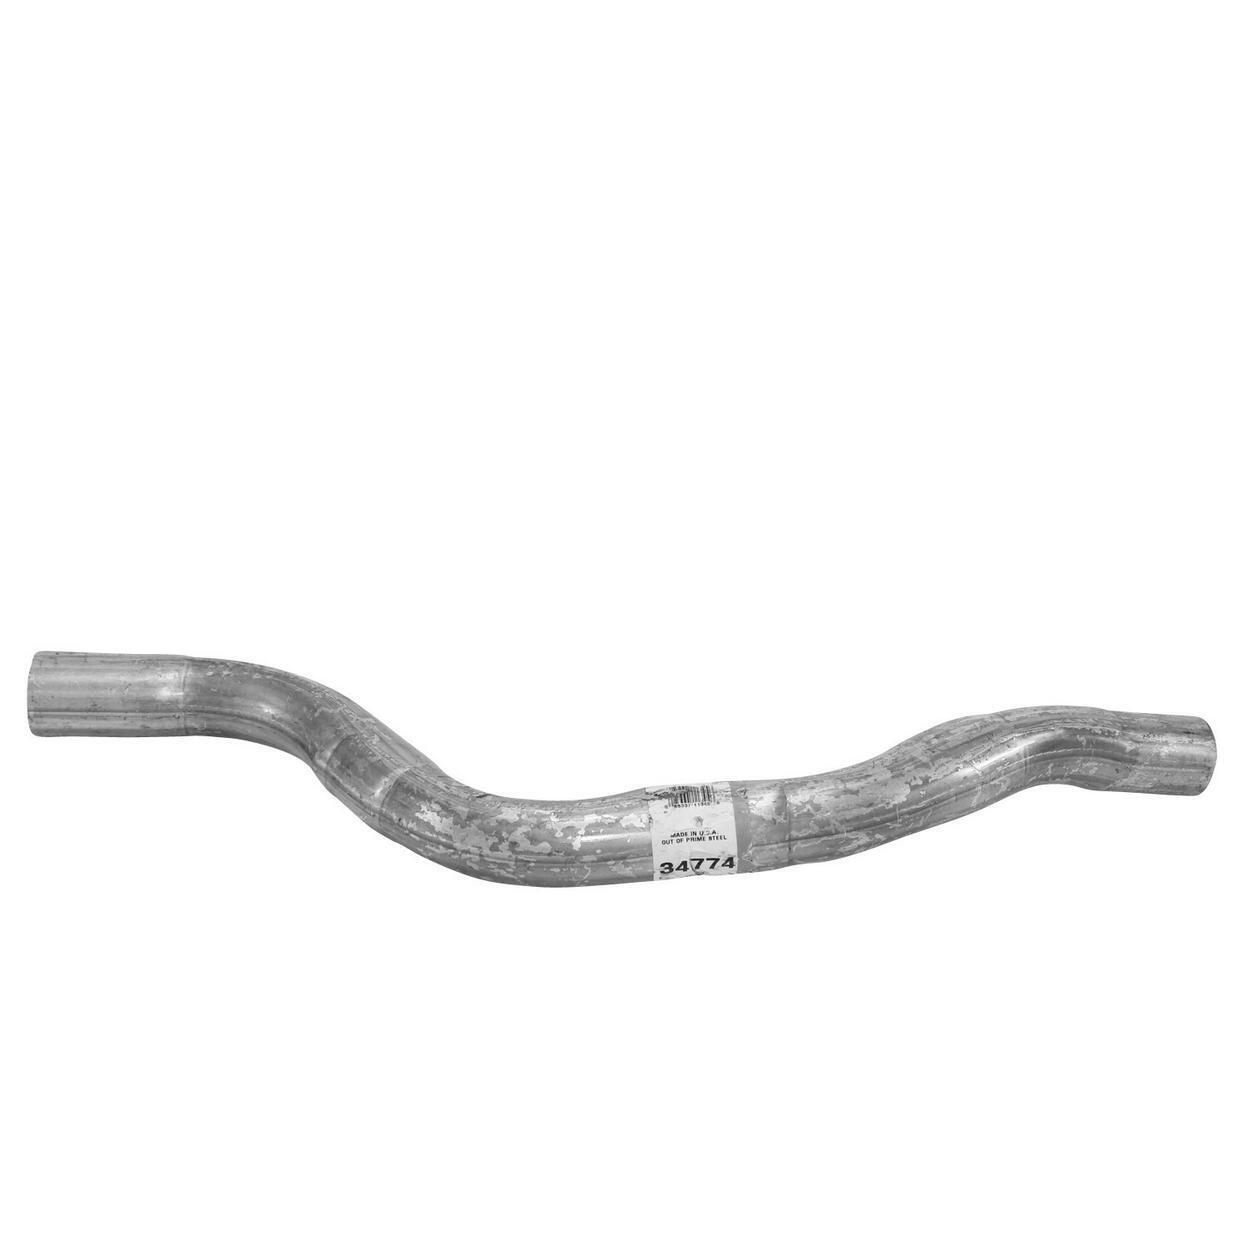 34774-AW Exhaust Tail Pipe Fits 1989 Chrysler LeBaron GT Turbo 2.5L L4 GAS SOHC